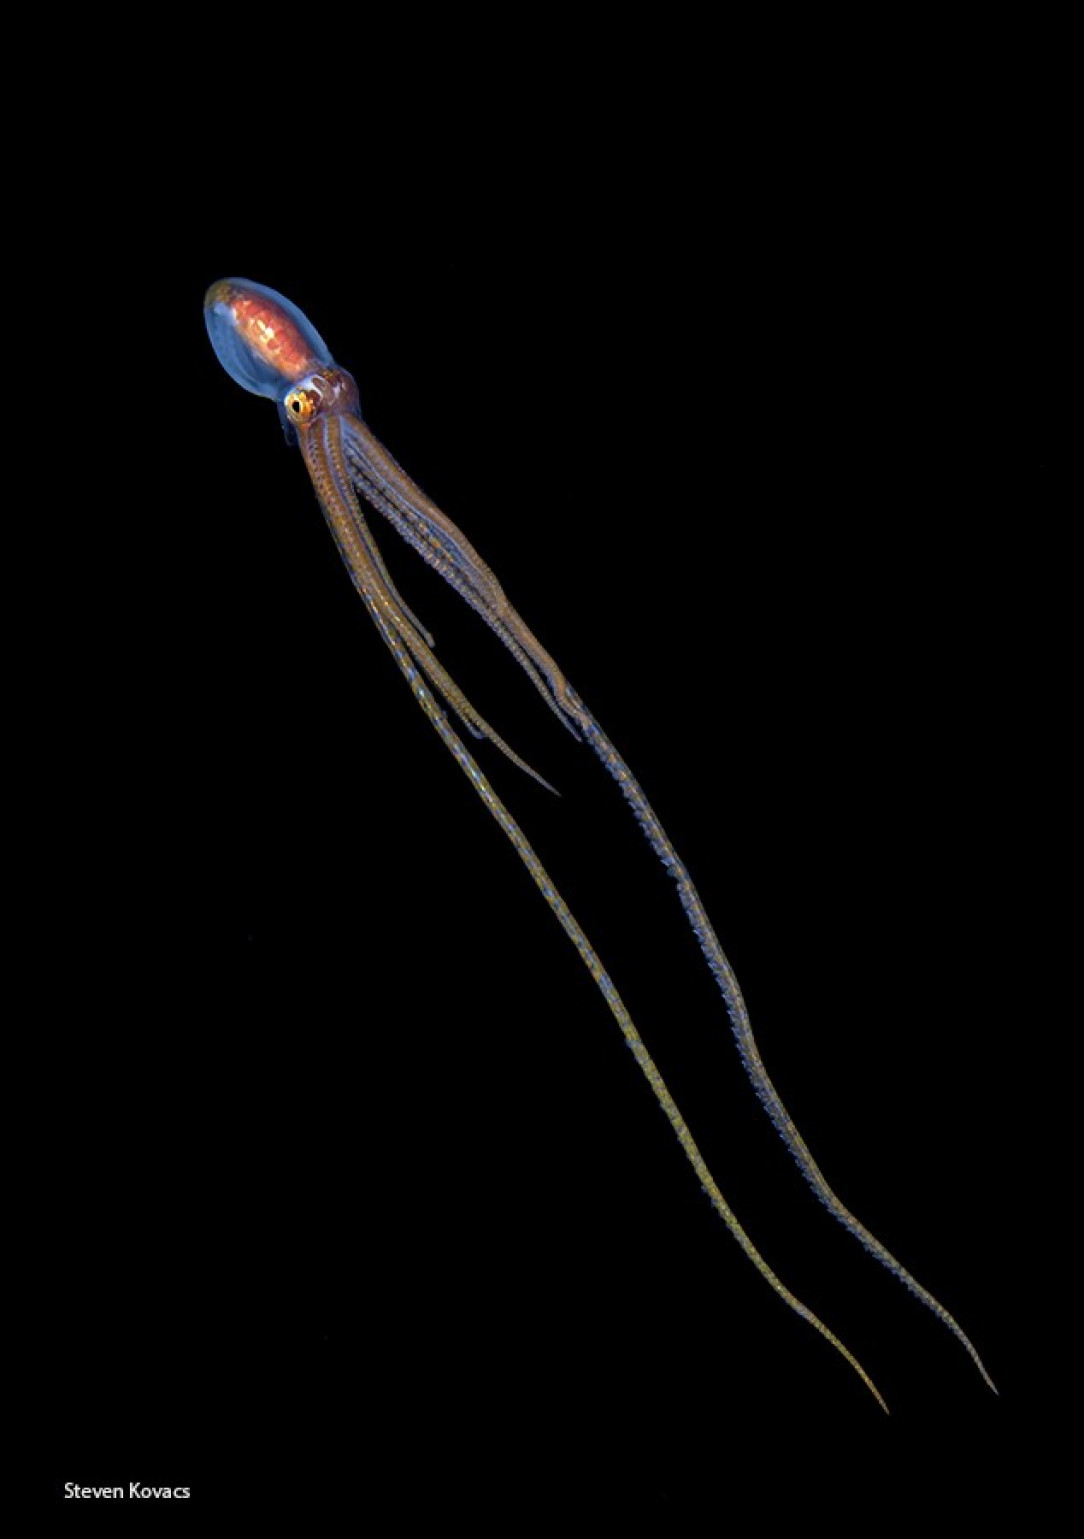 A Long Arm Octopus, photographed in Hawaii